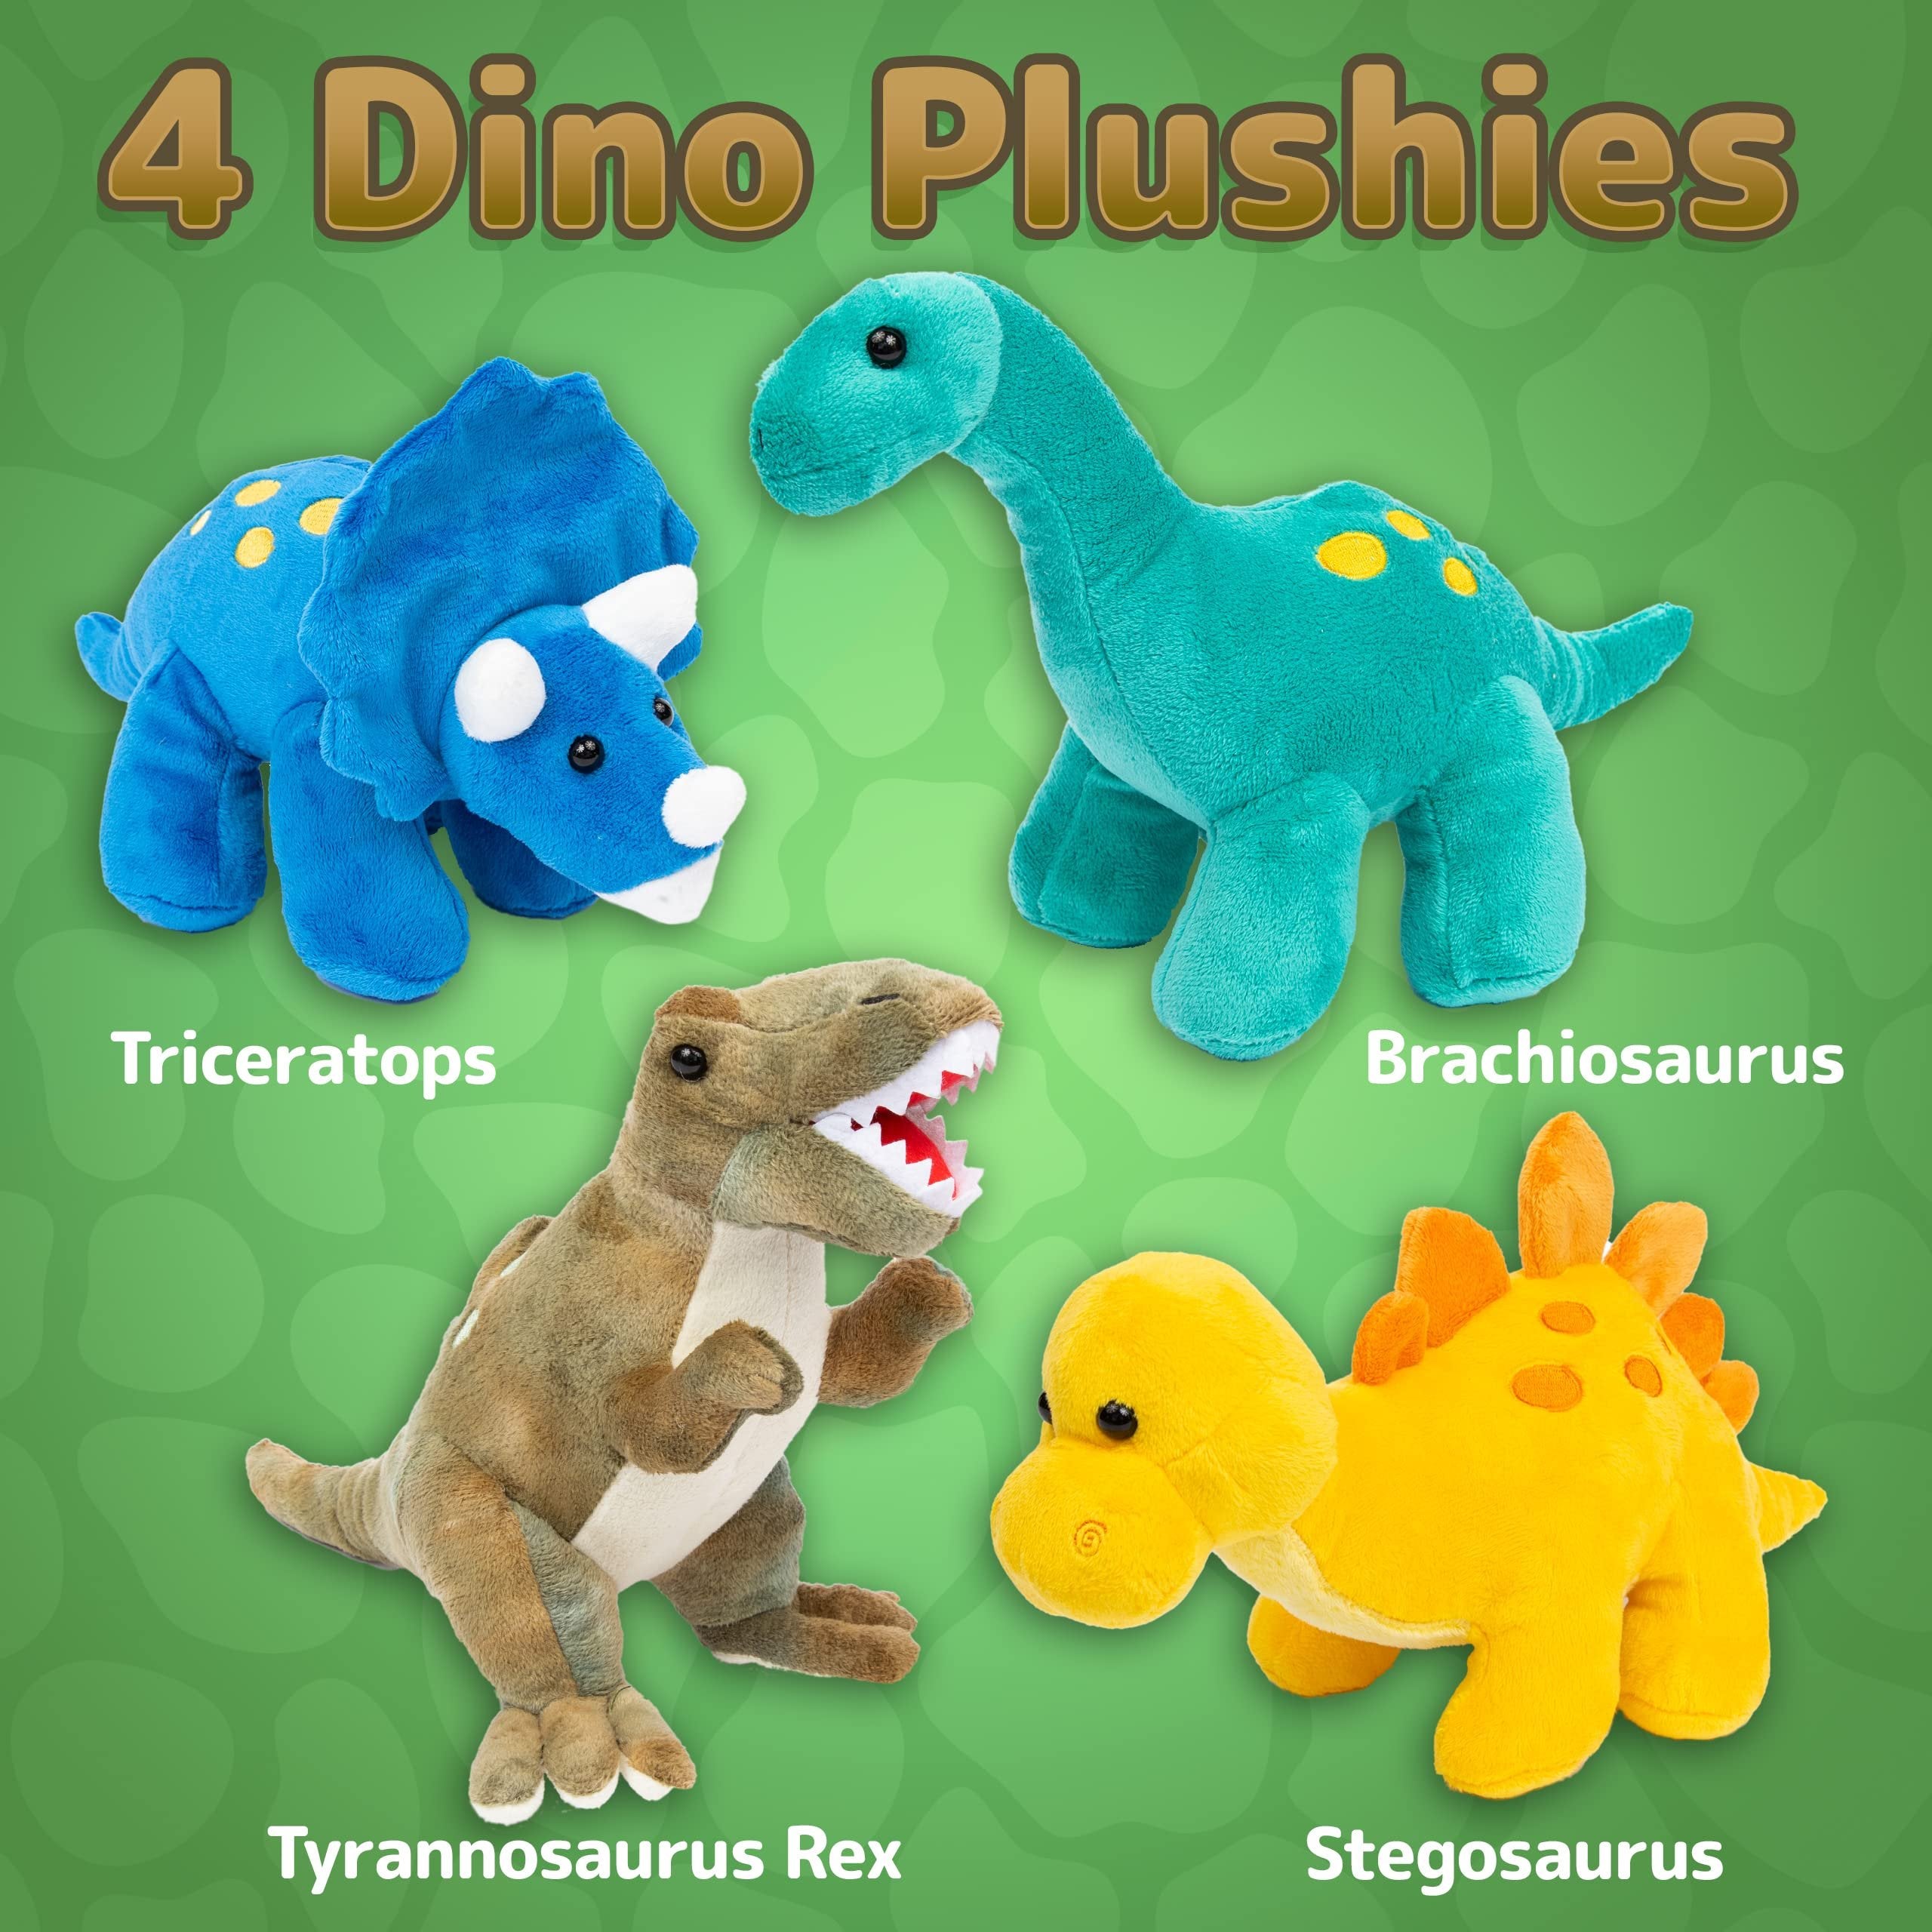 PREXTEX Plush Dinosaurs 8 Pack 5'' Long - Great Gift for Kids - Stuffed Animal Assortment - Great Set for Kids